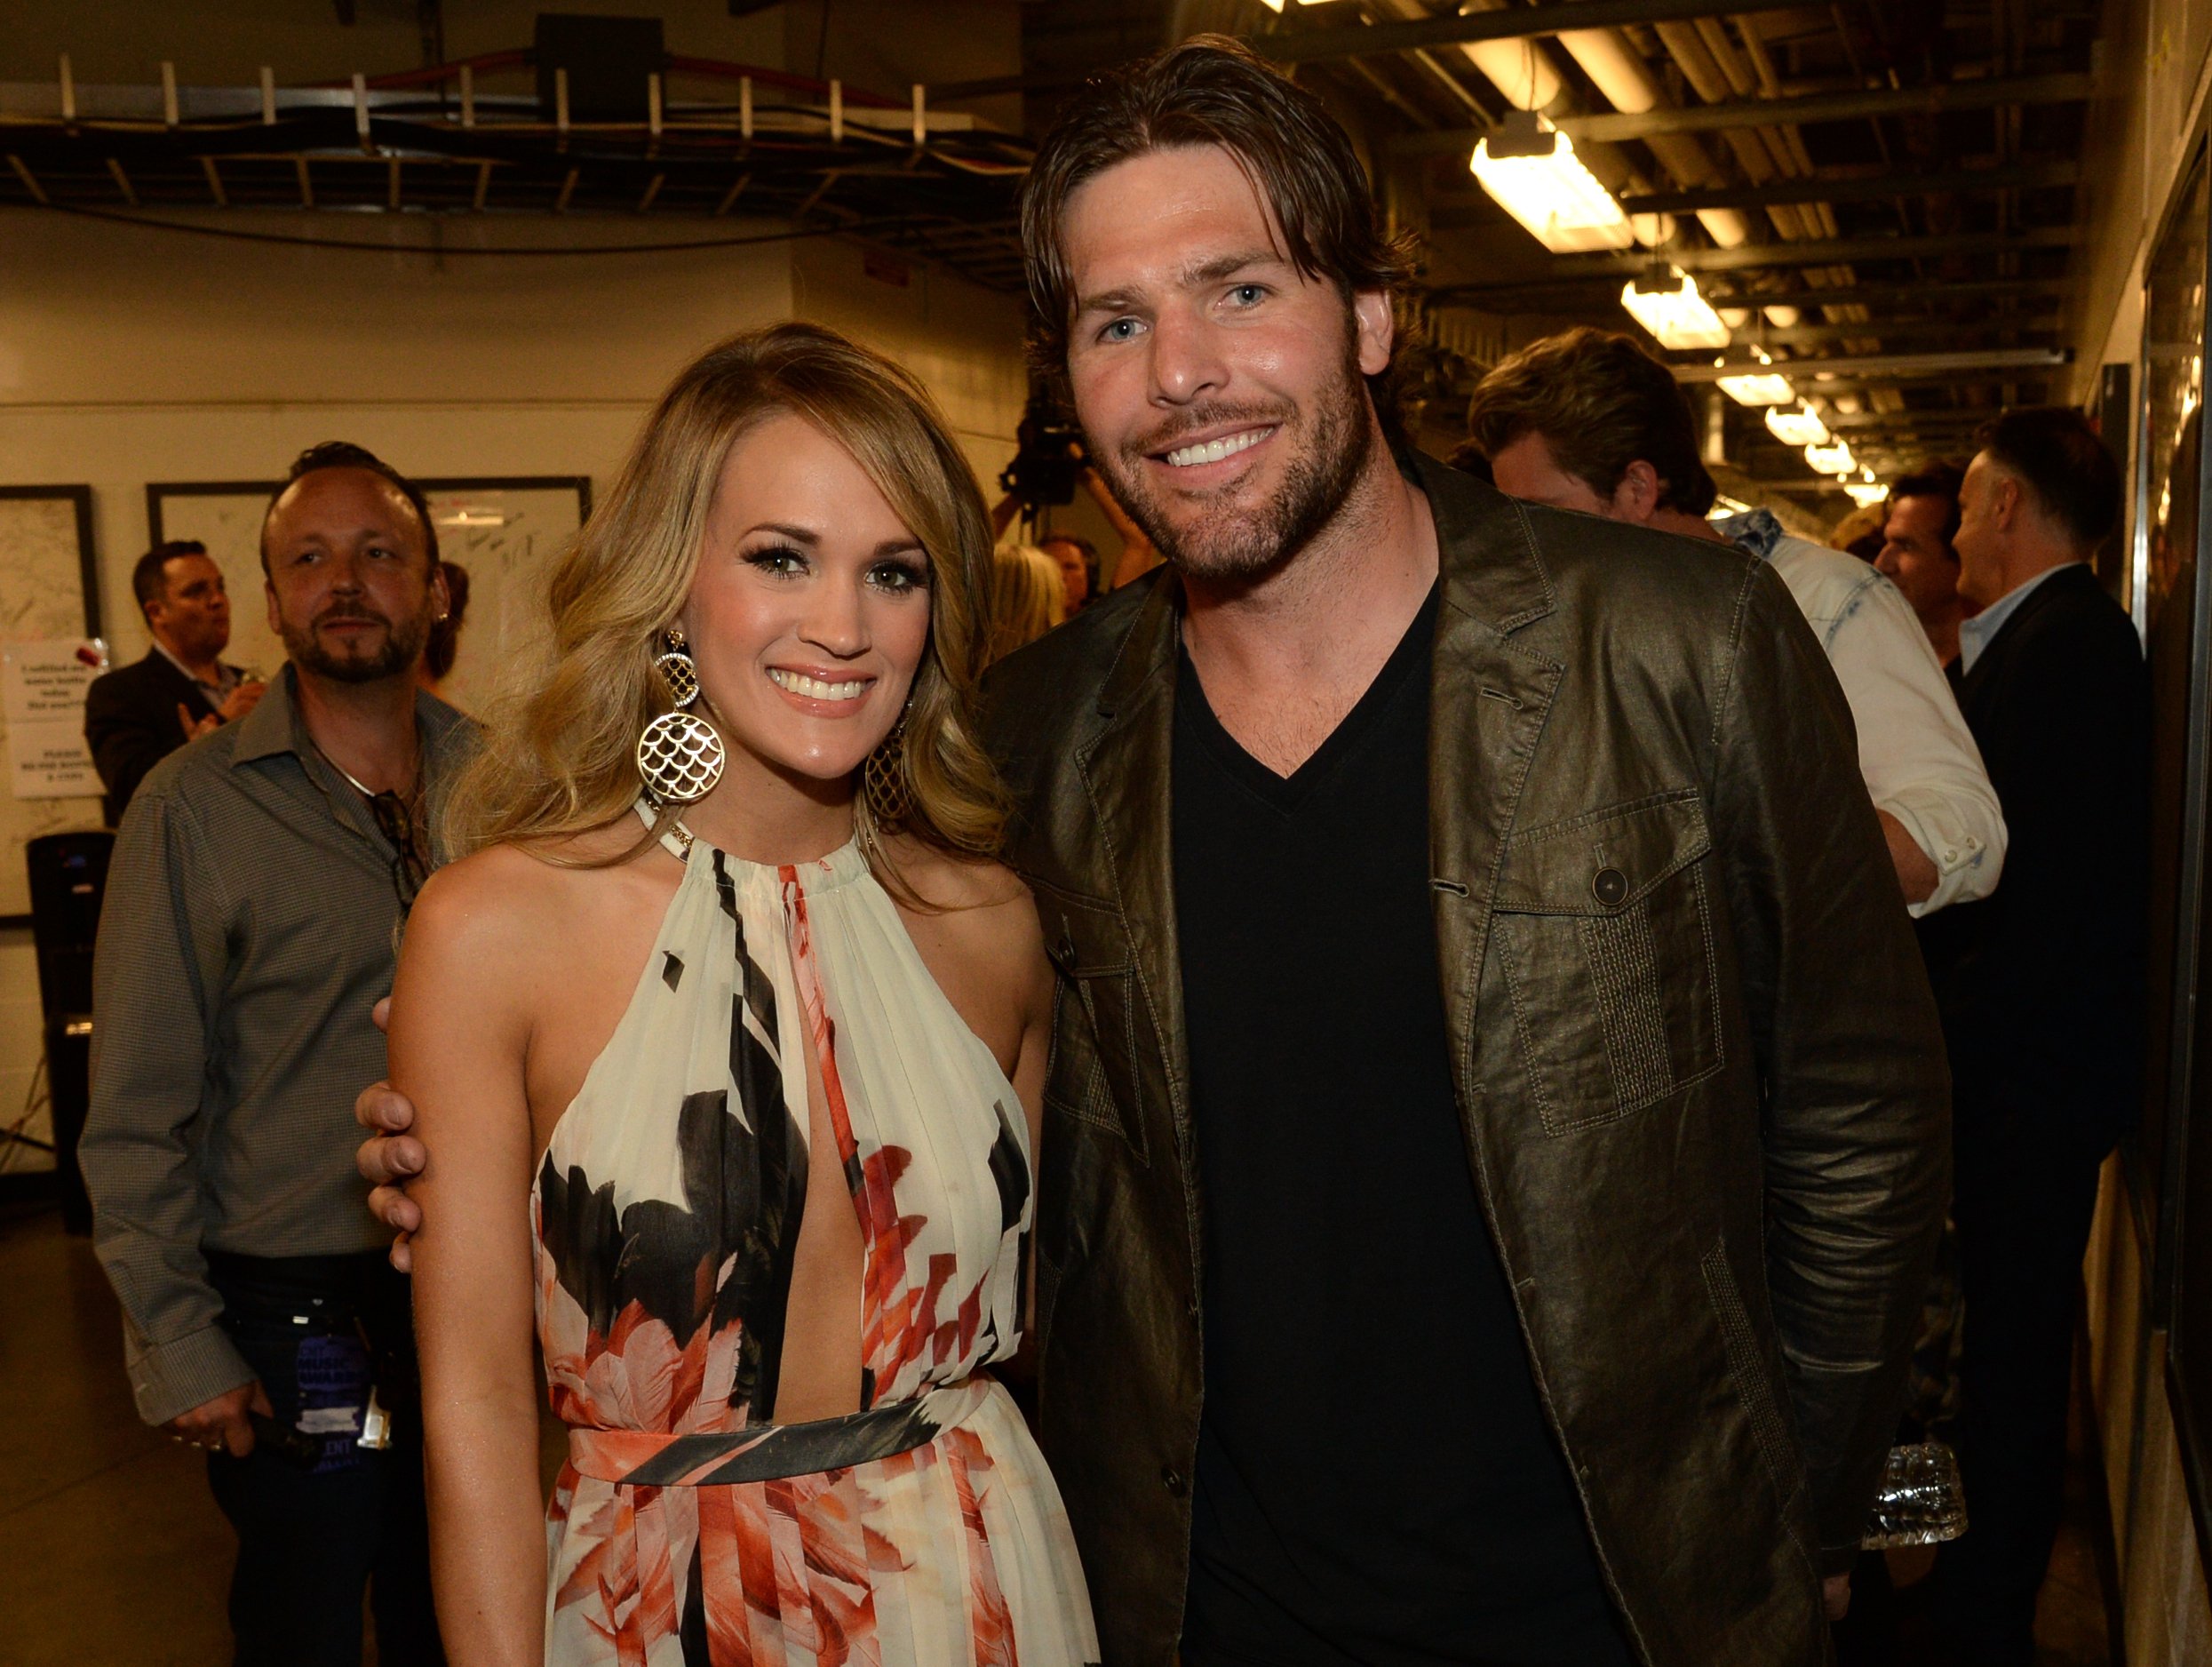 Carrie Underwood and Mike Fisher attend the 2014 CMT Music Awards at Bridgestone Arena on June 4, 2014 in Nashville, Tennessee | Photo: Getty Images